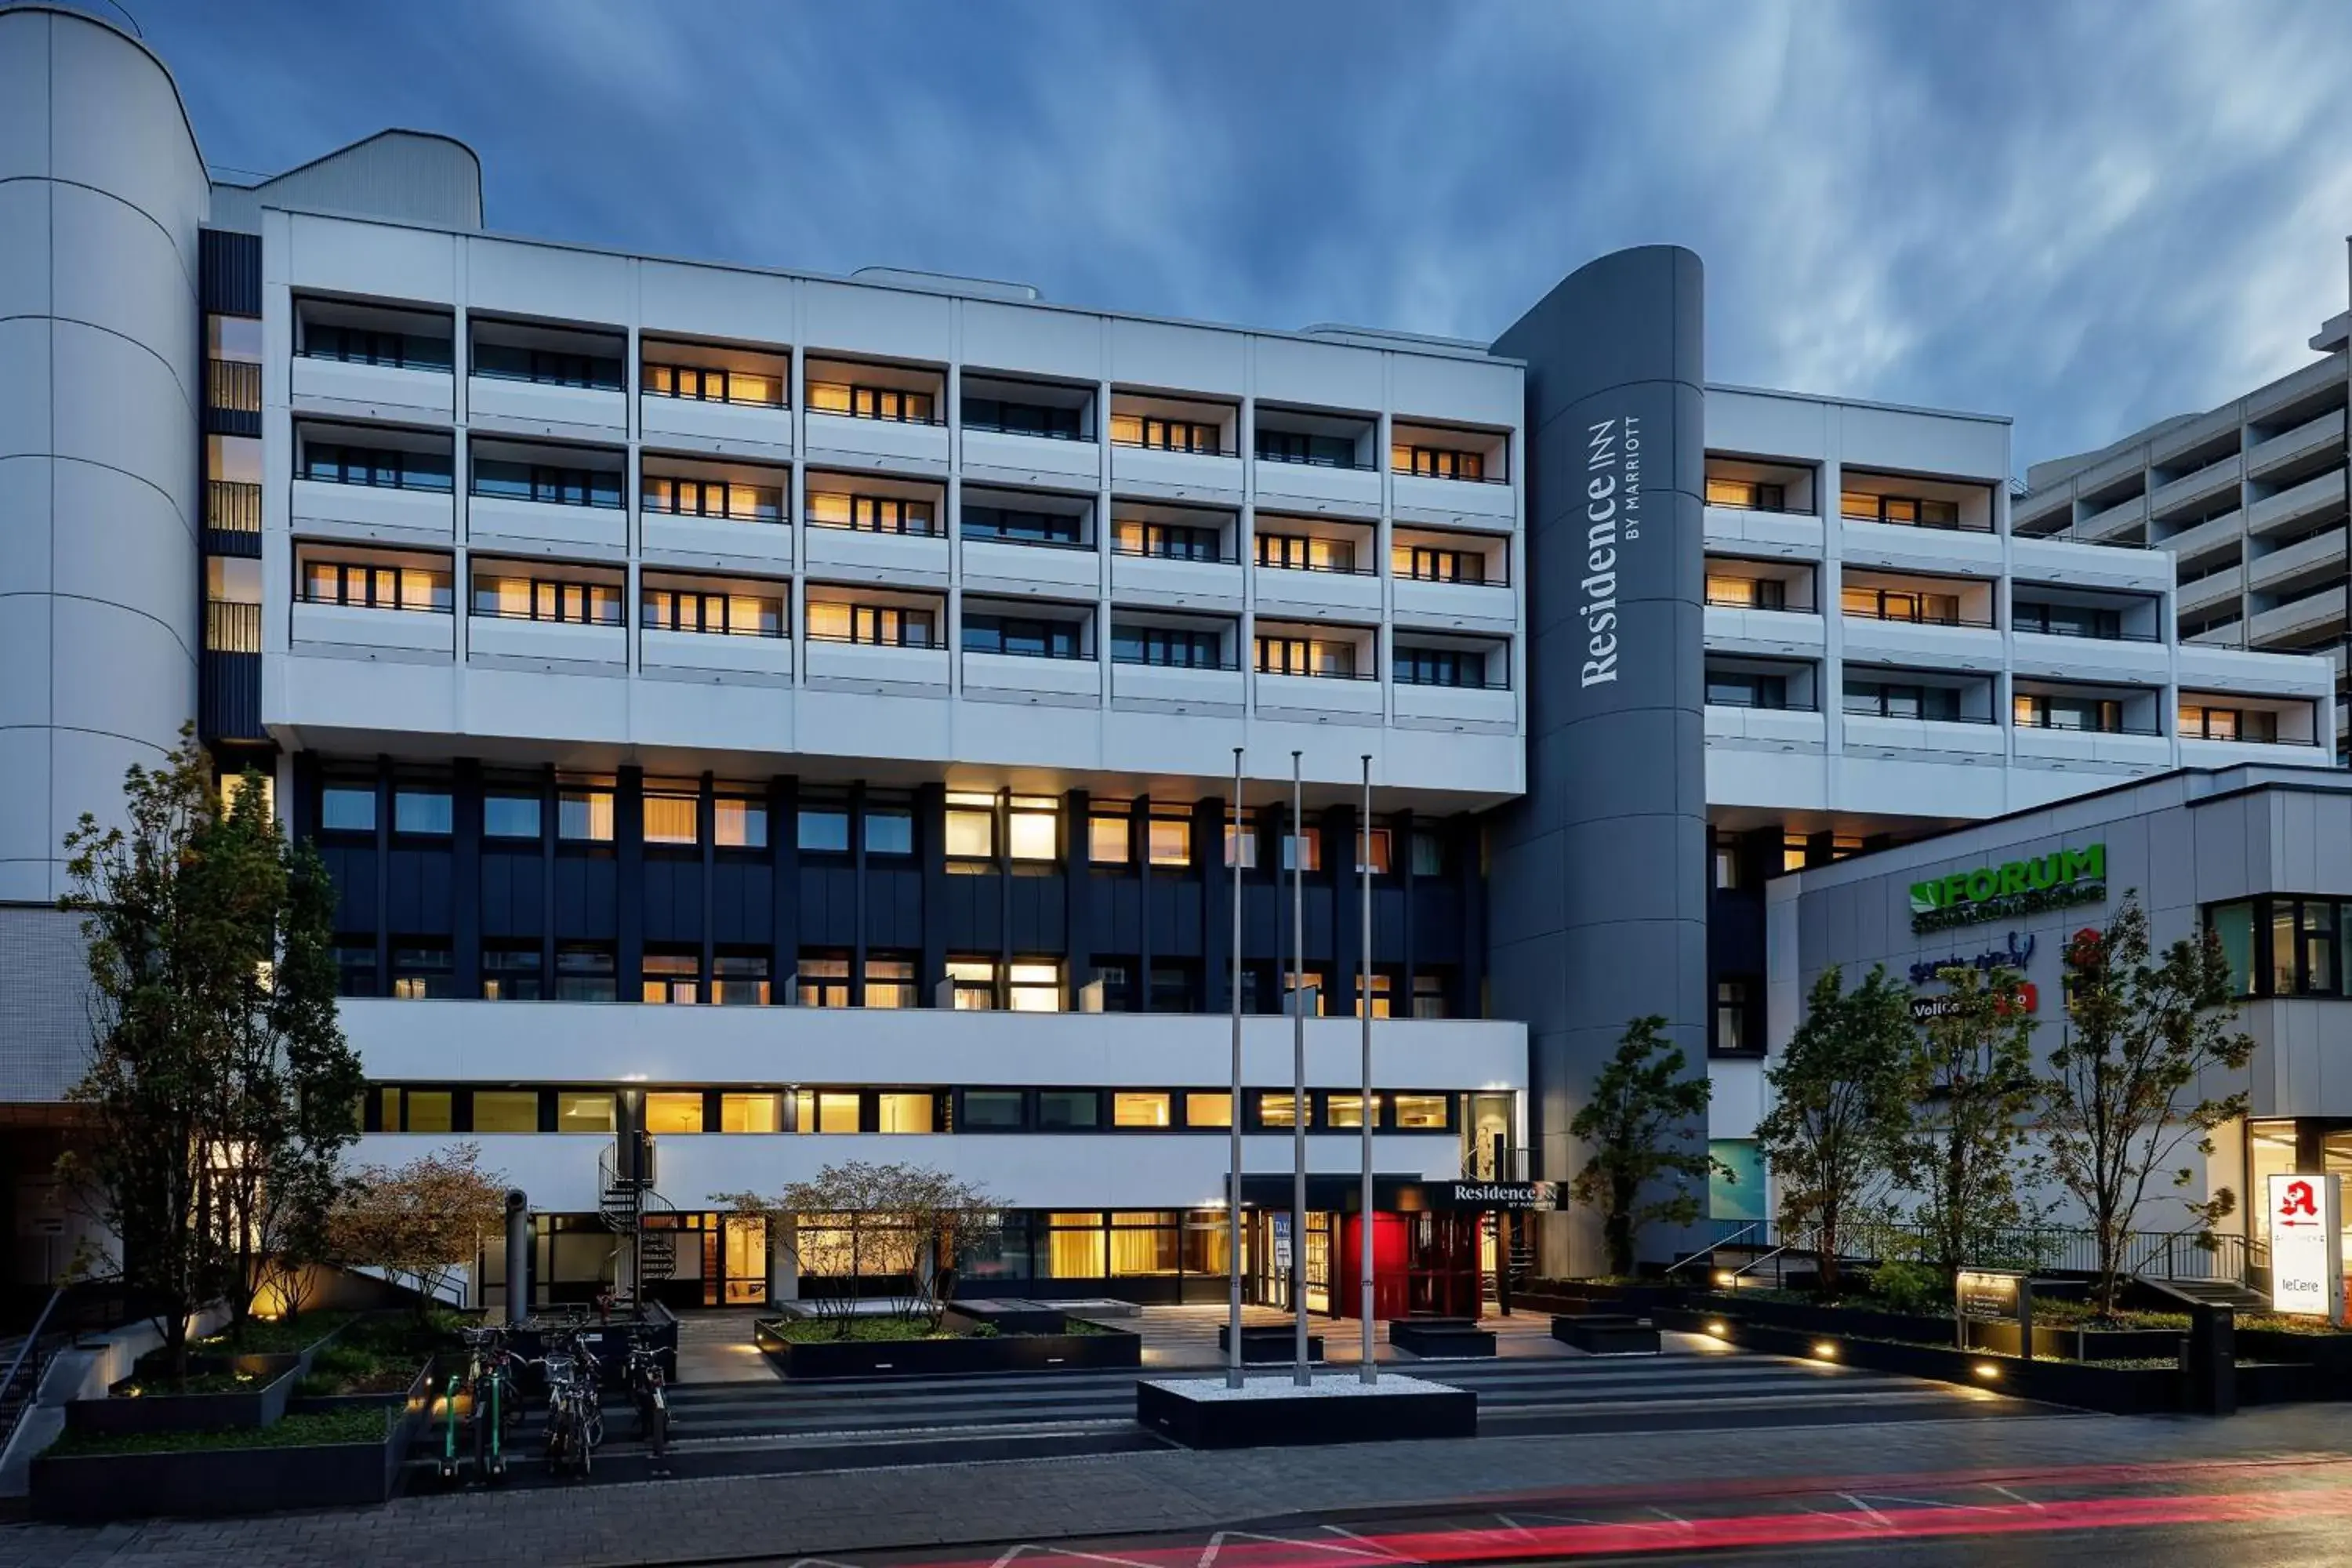 Property Building in Residence Inn by Marriott Munich Central